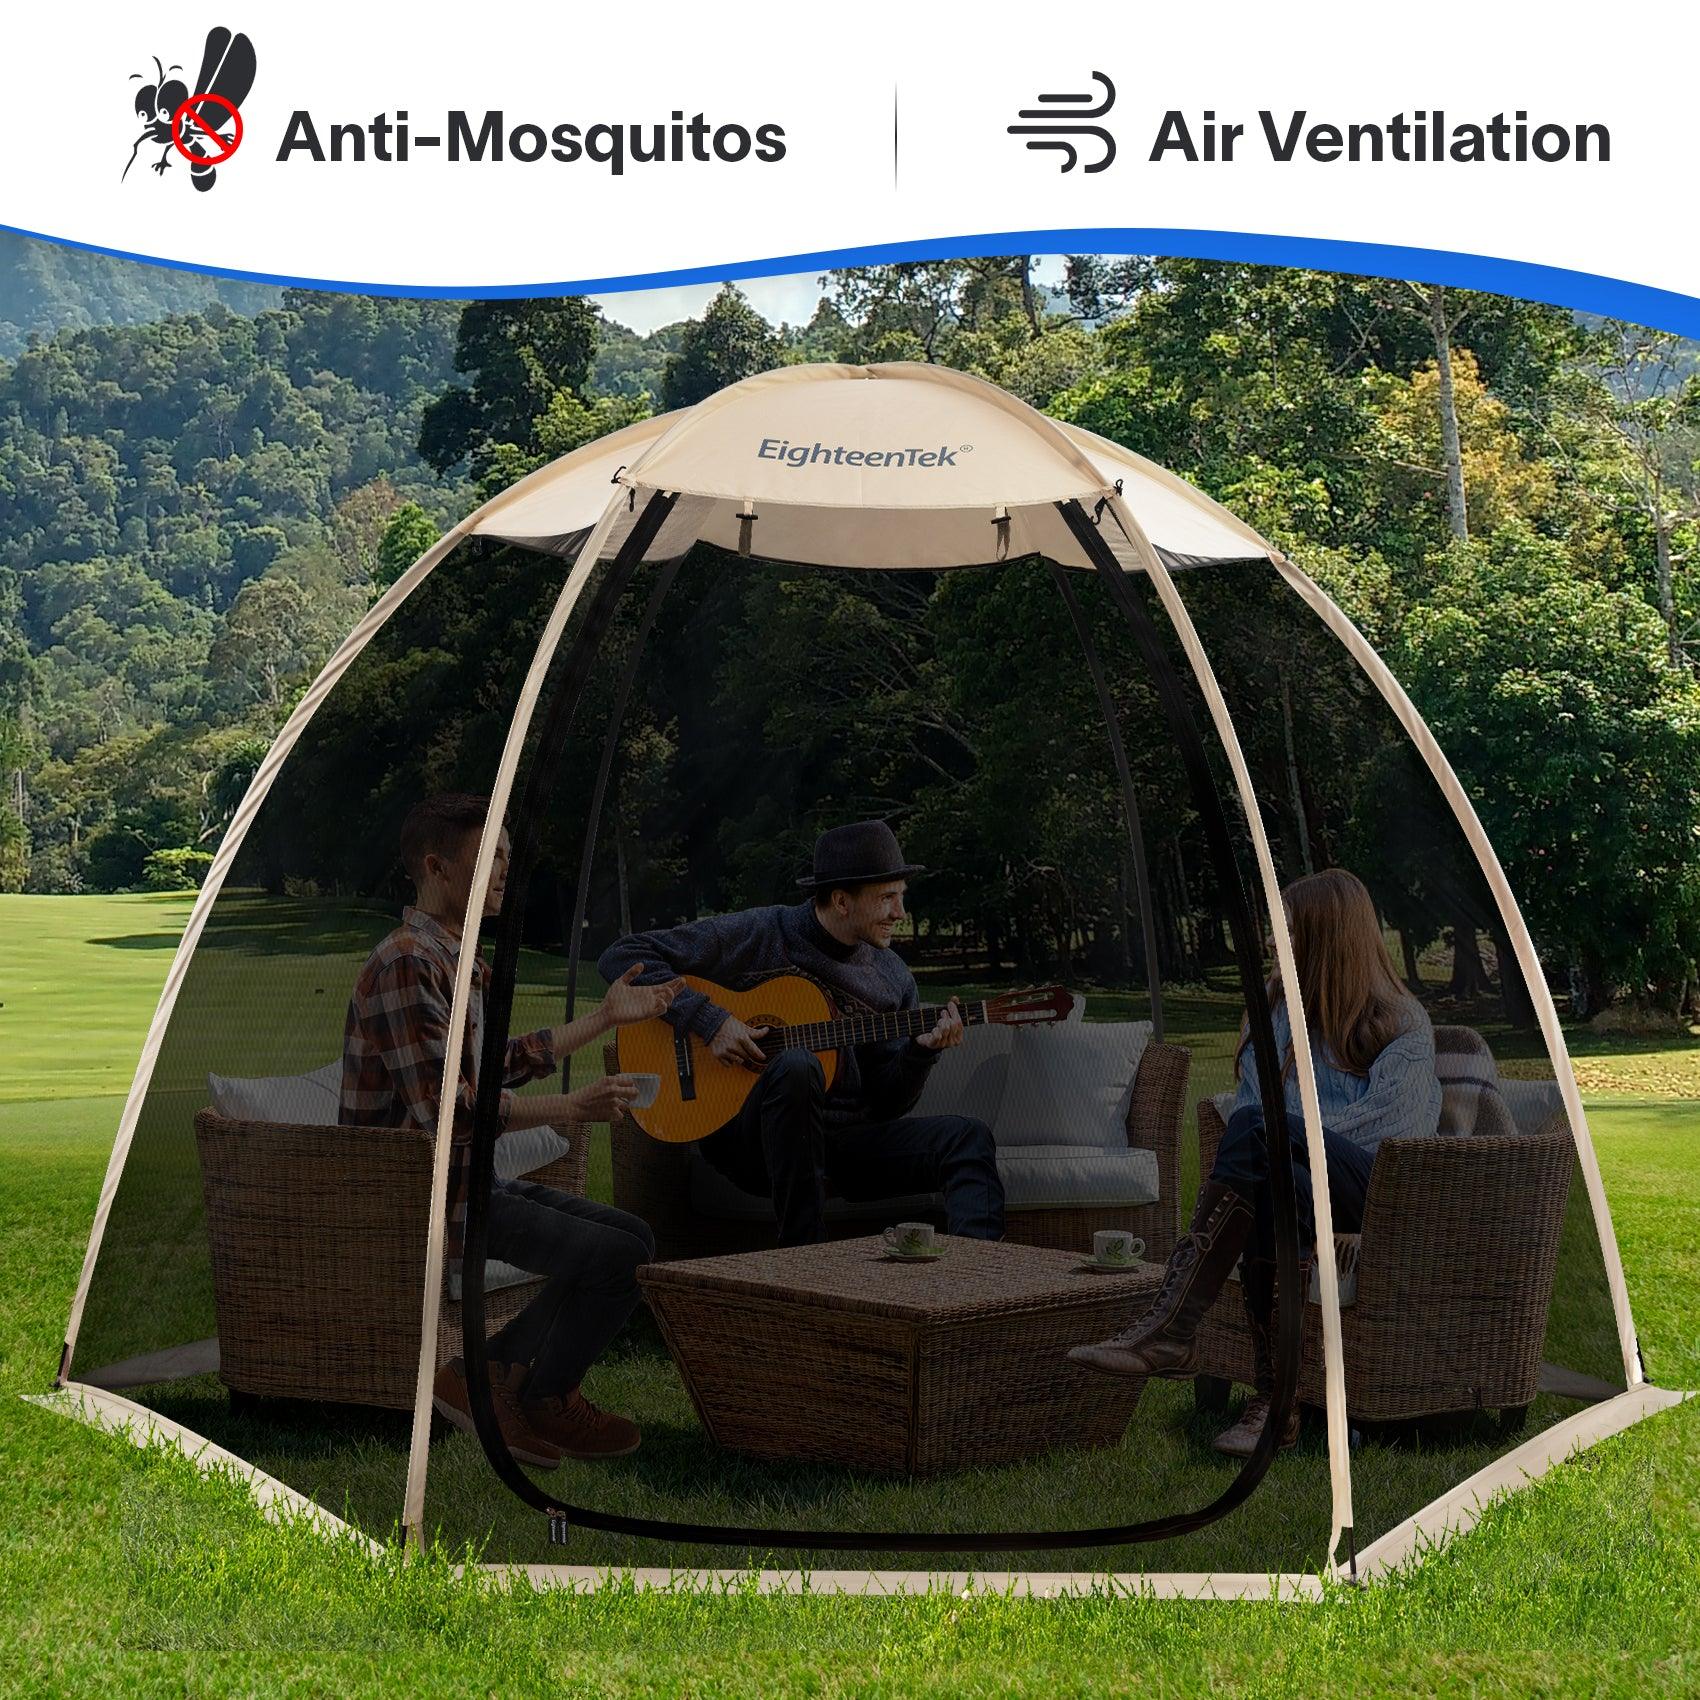 Insect bite prevention and ventilation Screen House Tent